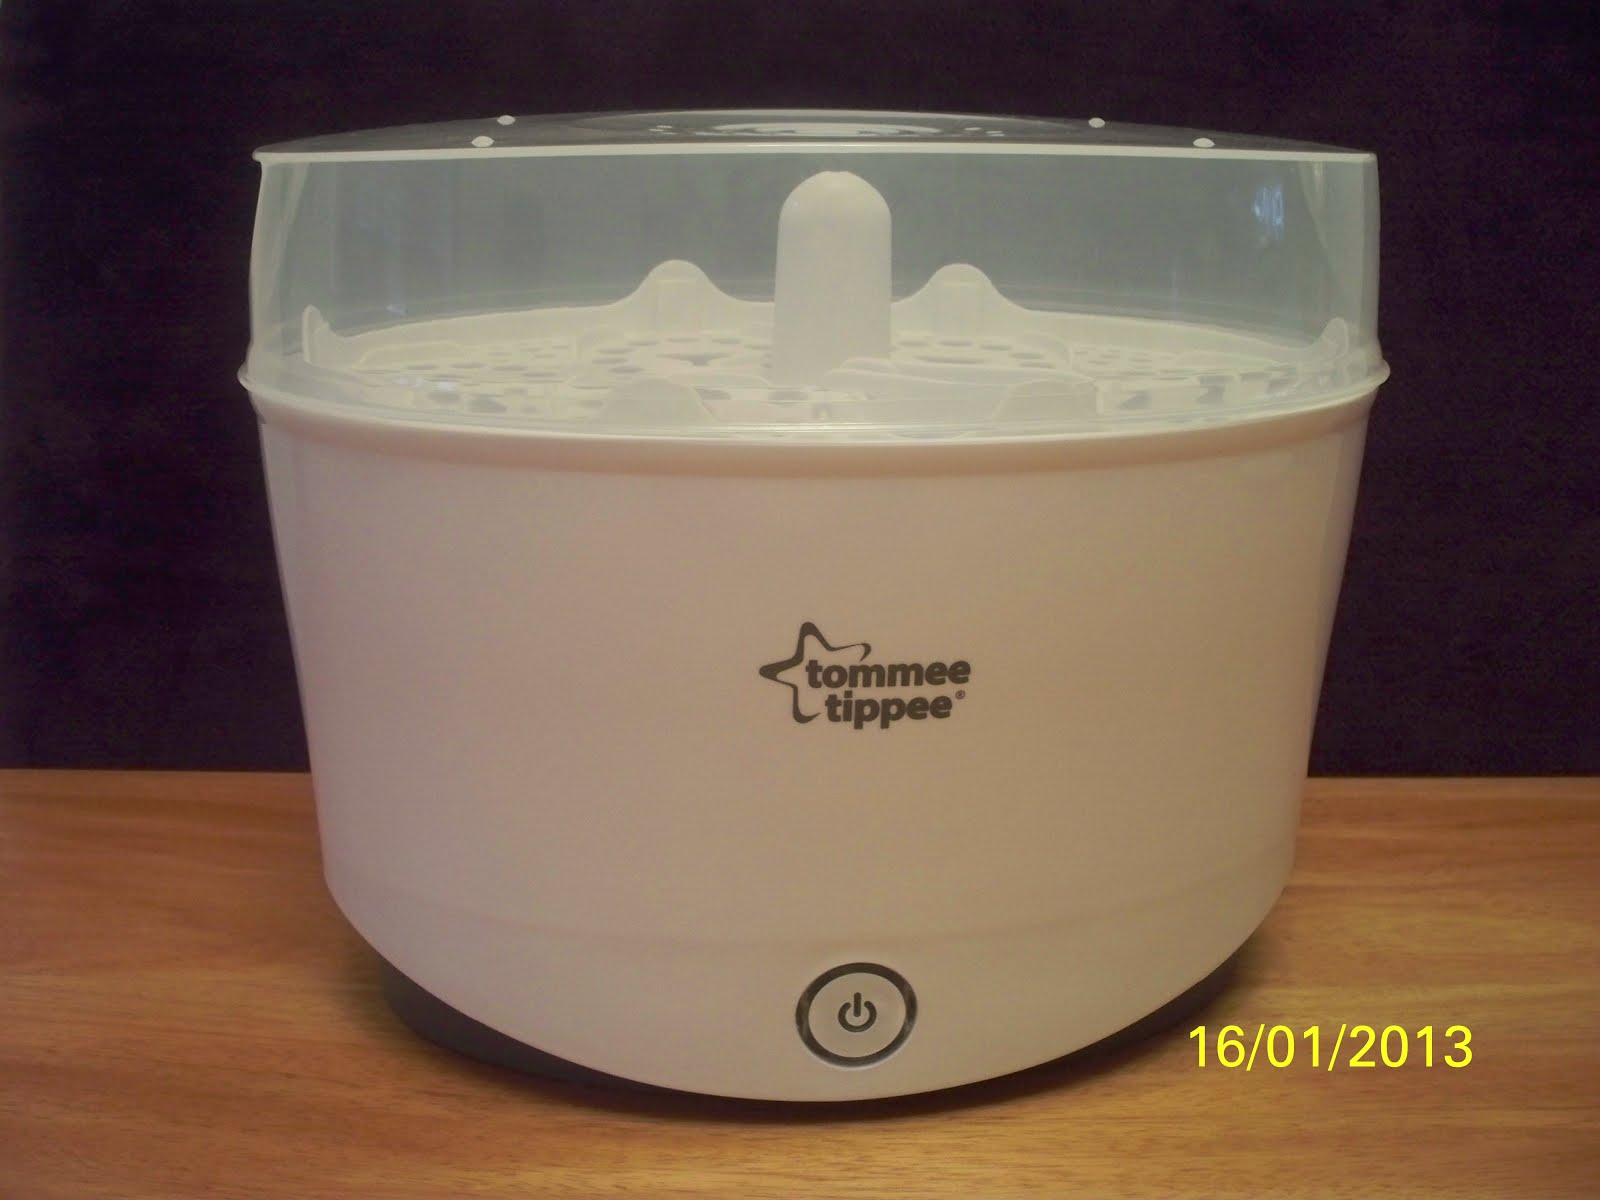 Tommee Tippee Electric Steam Sterilizer Reviews